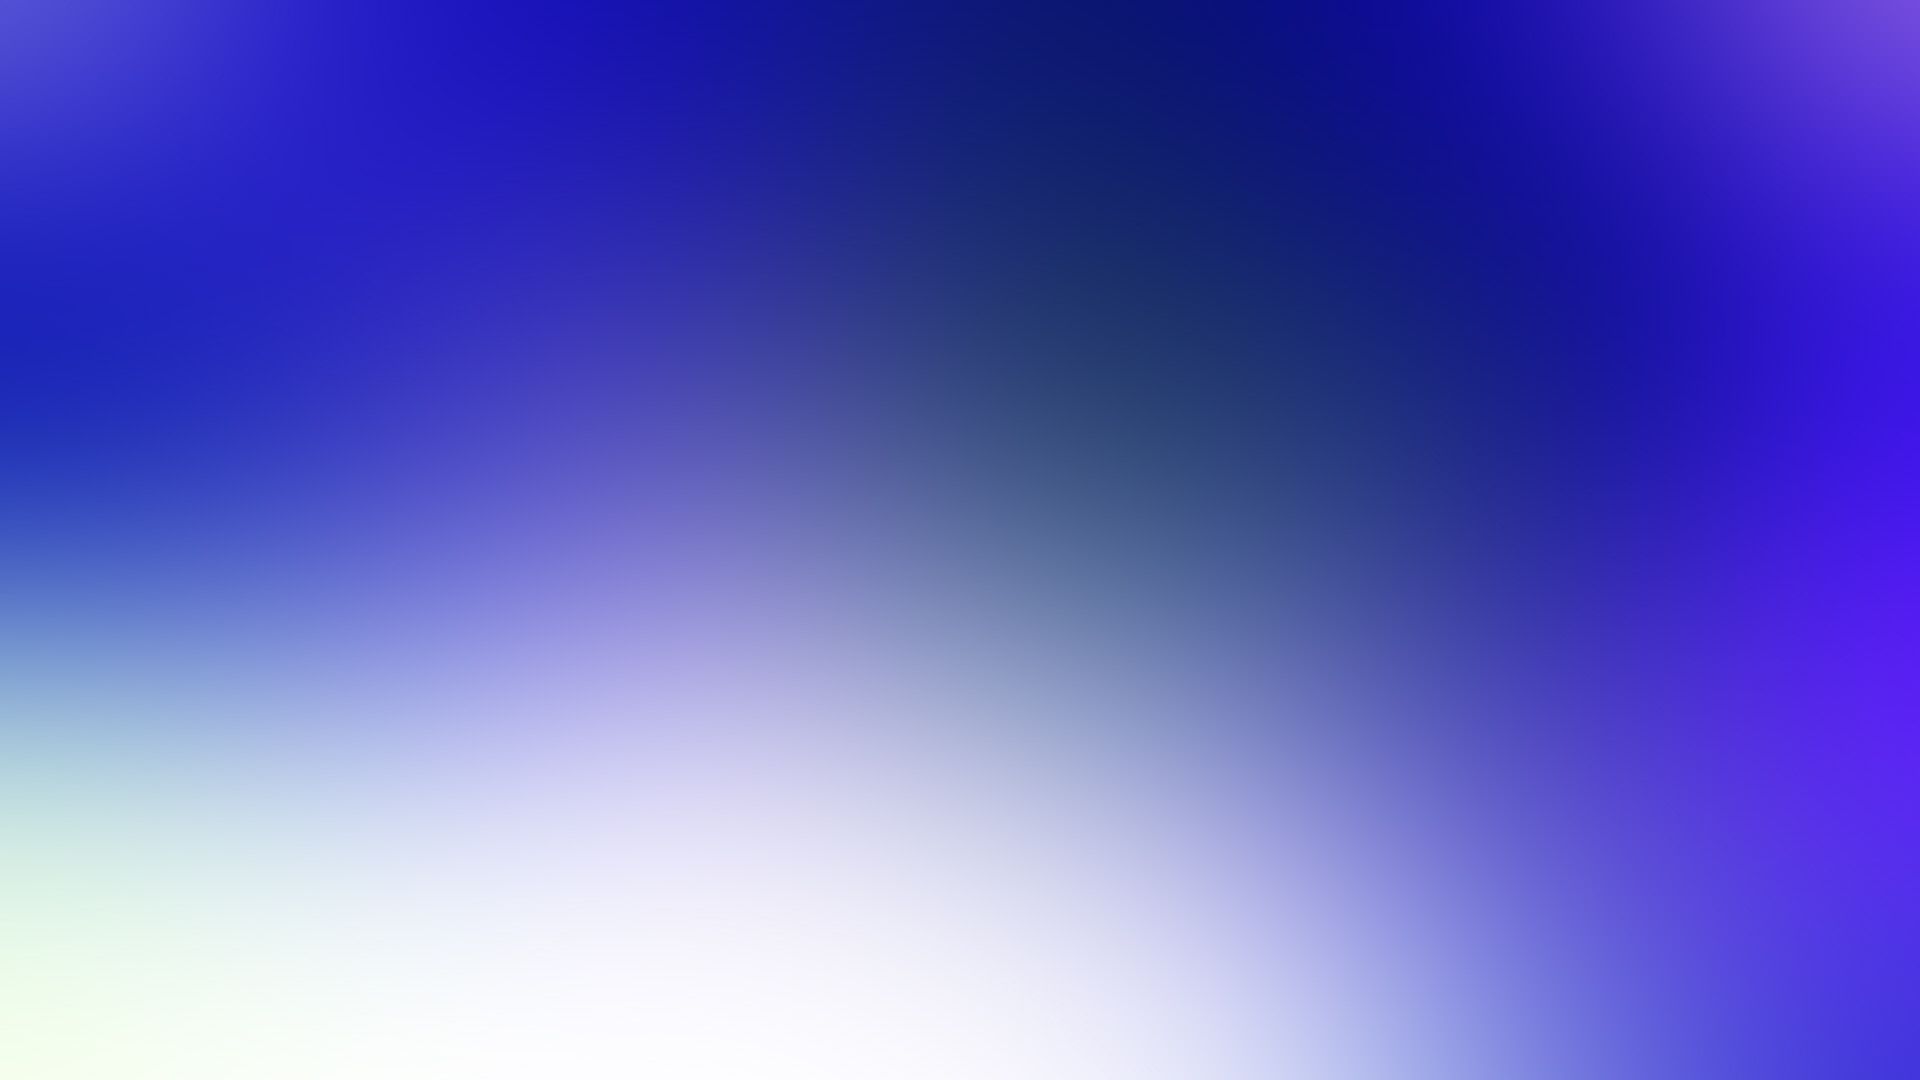 Download Wallpaper 1920x1080 Blue, White, Spots, Abstraction Full ...